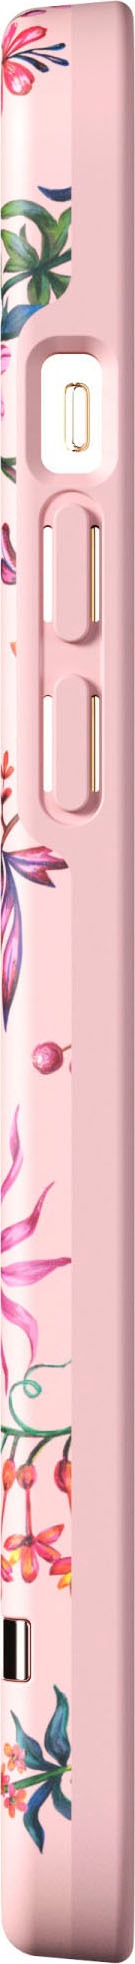 richmond & finch Smartphone-Hülle »PINK BLOOMS«, iPhone 12 Pro Max, 17,02 cm (6,7 Zoll)